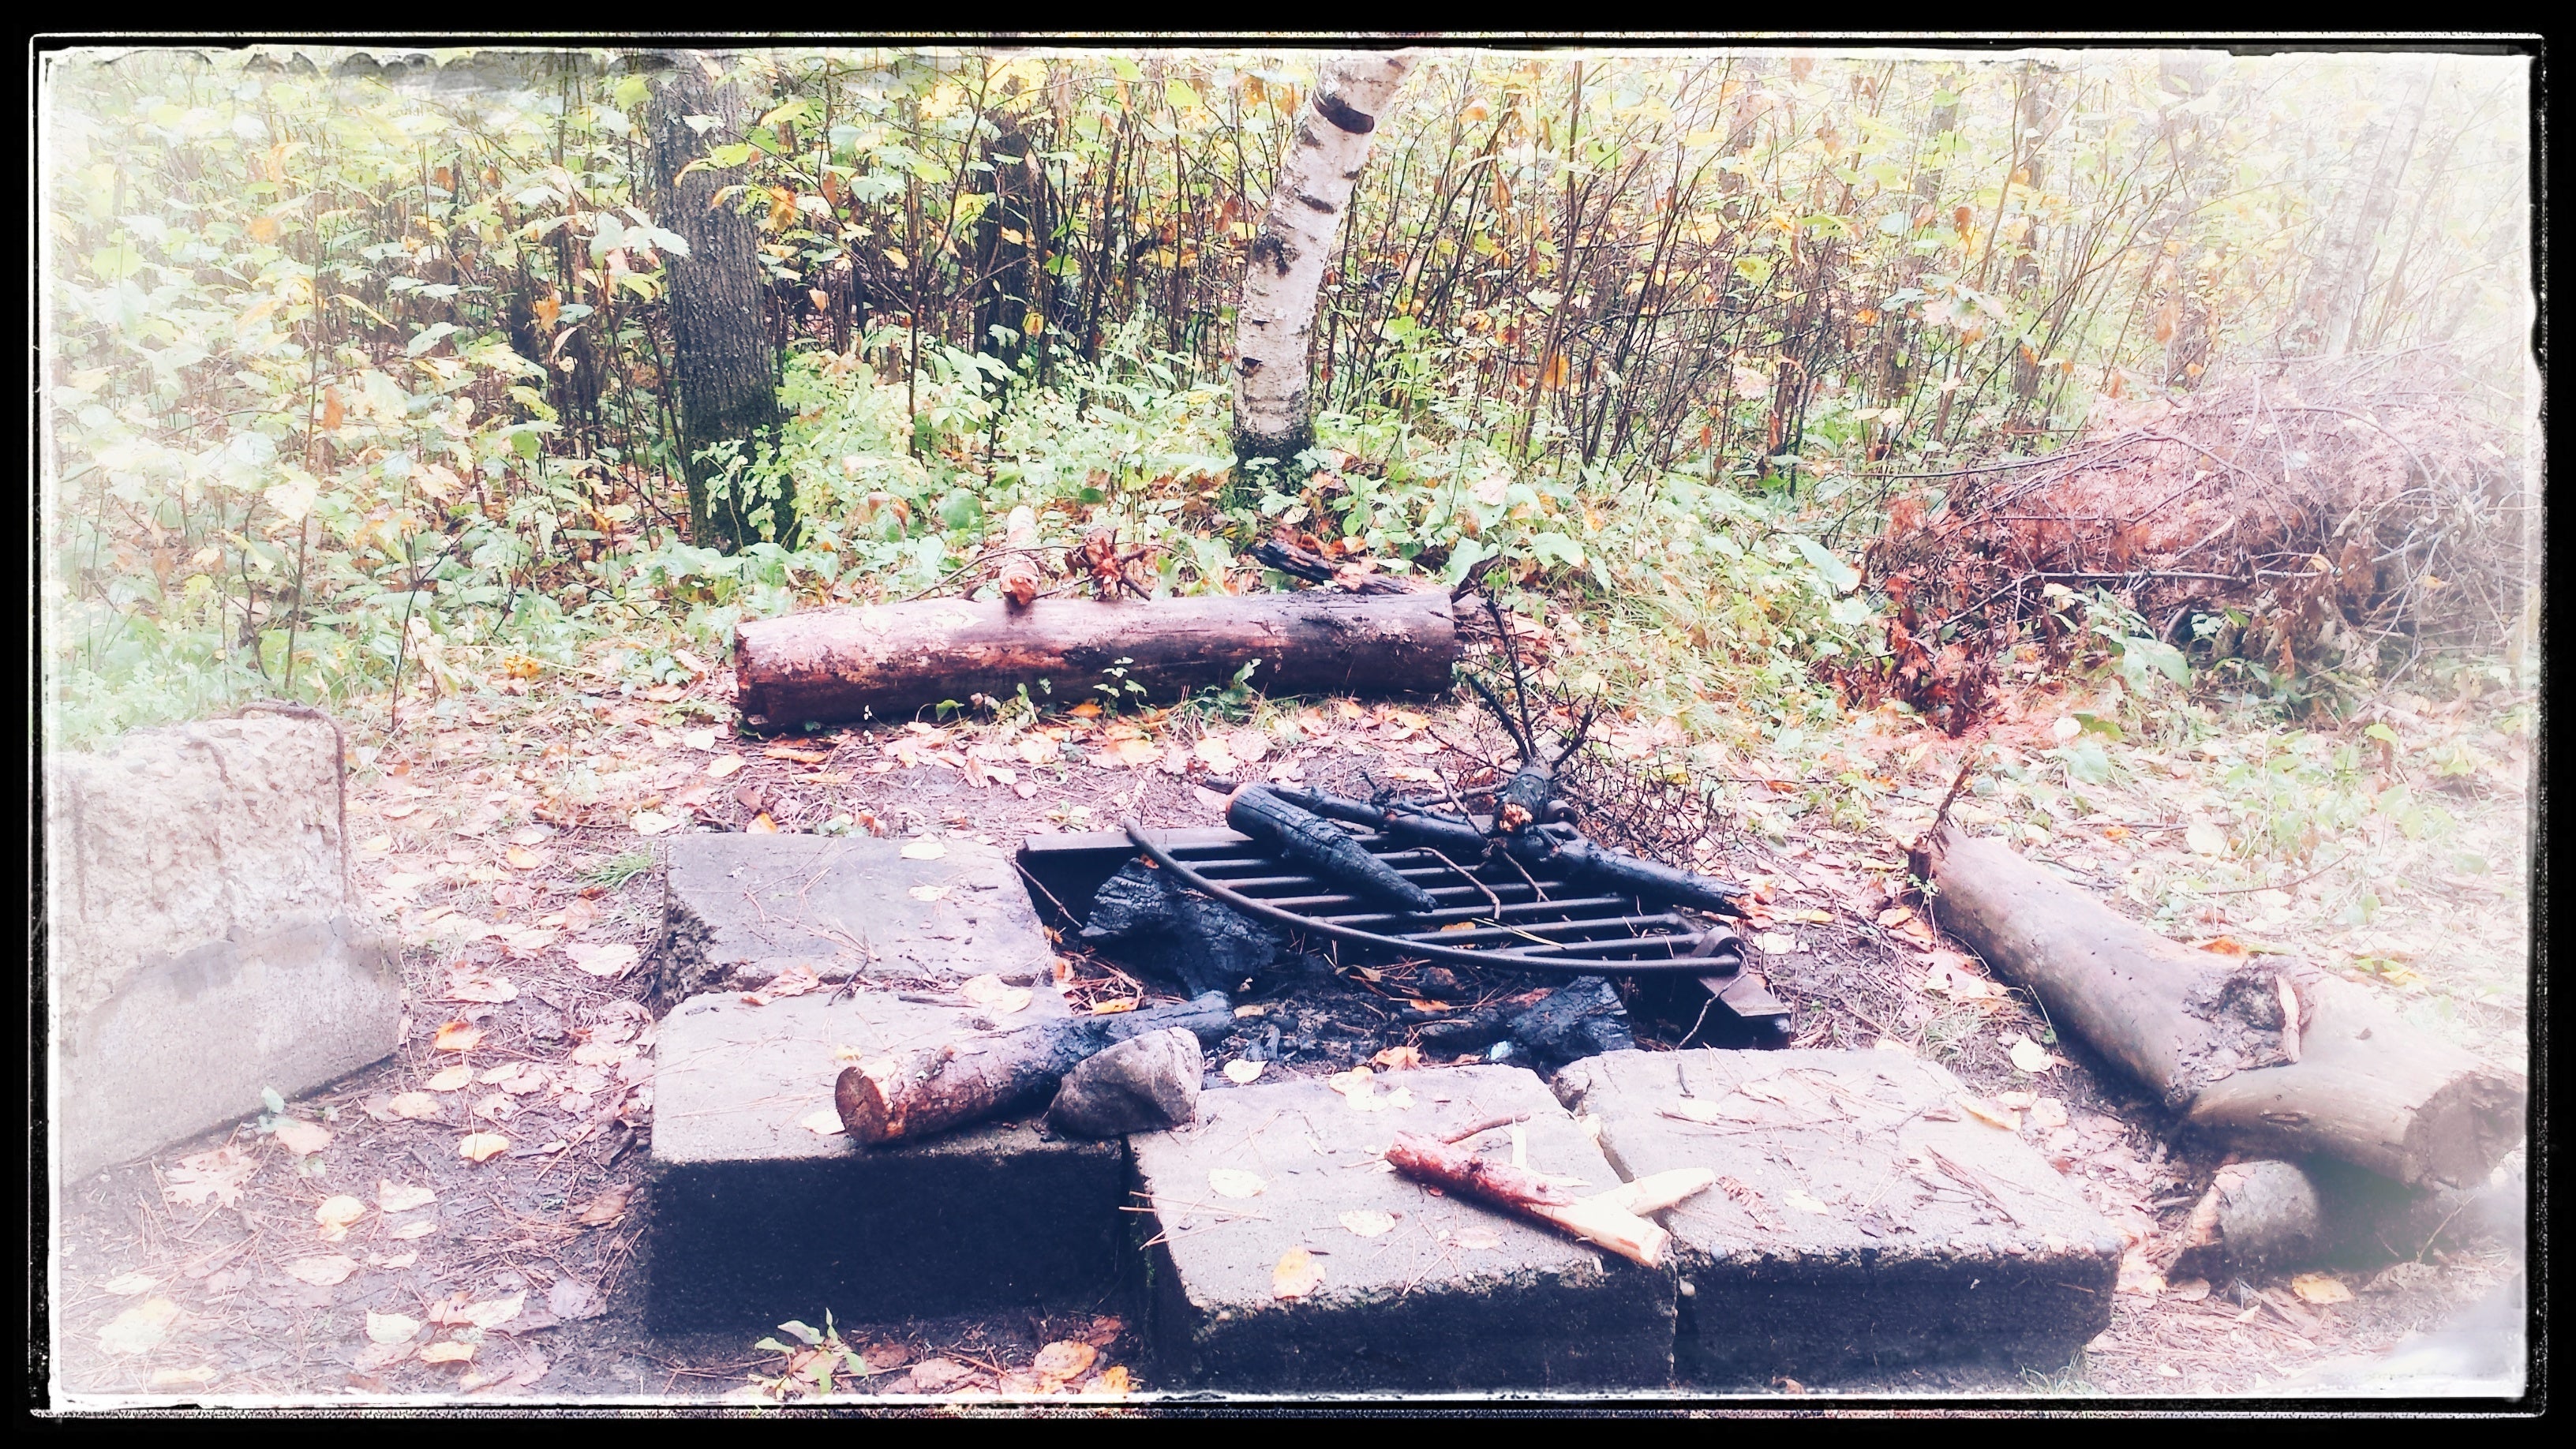 Fire pit with concrete slabs...great for camp stoves!